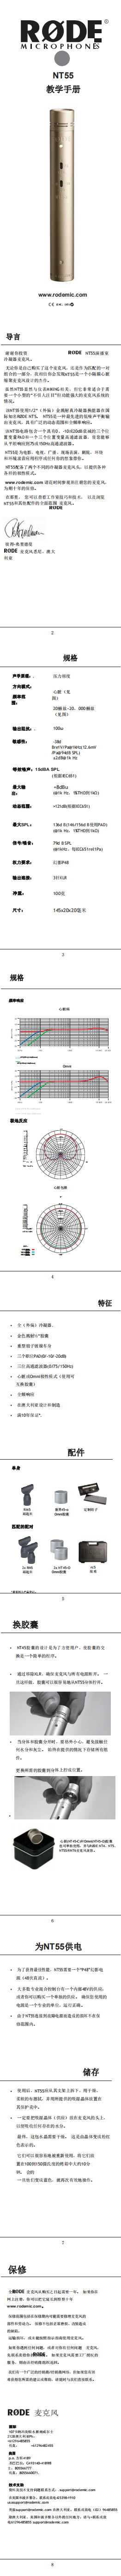 NT55 S_product_manual_1_8_translate_Chinese_0.png